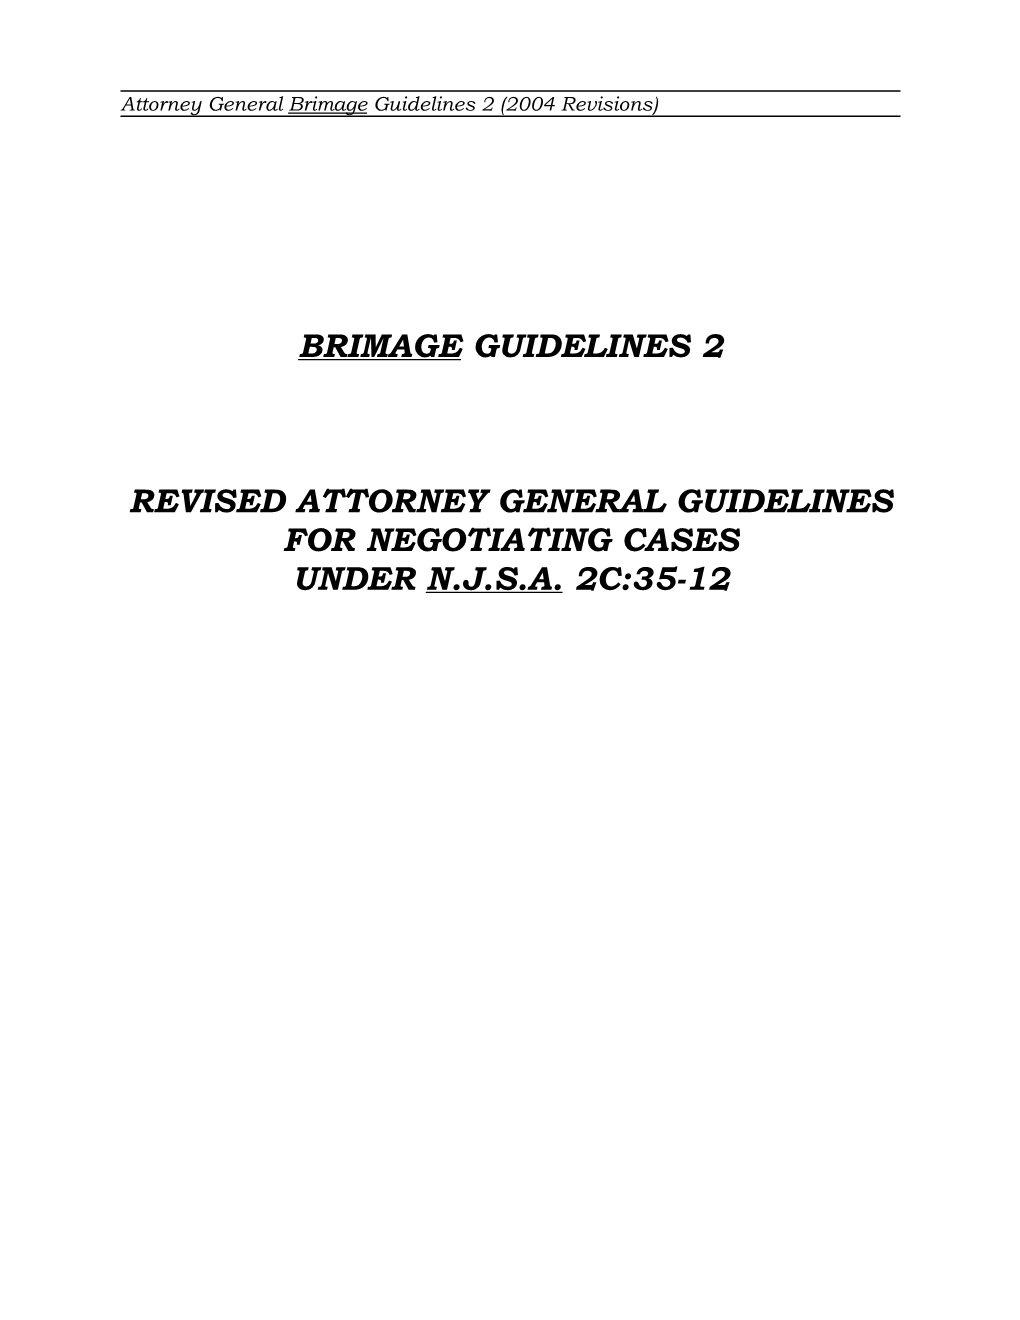 Brimage Guidelines 2 Revised Attorney General Guidelines for Negotiating